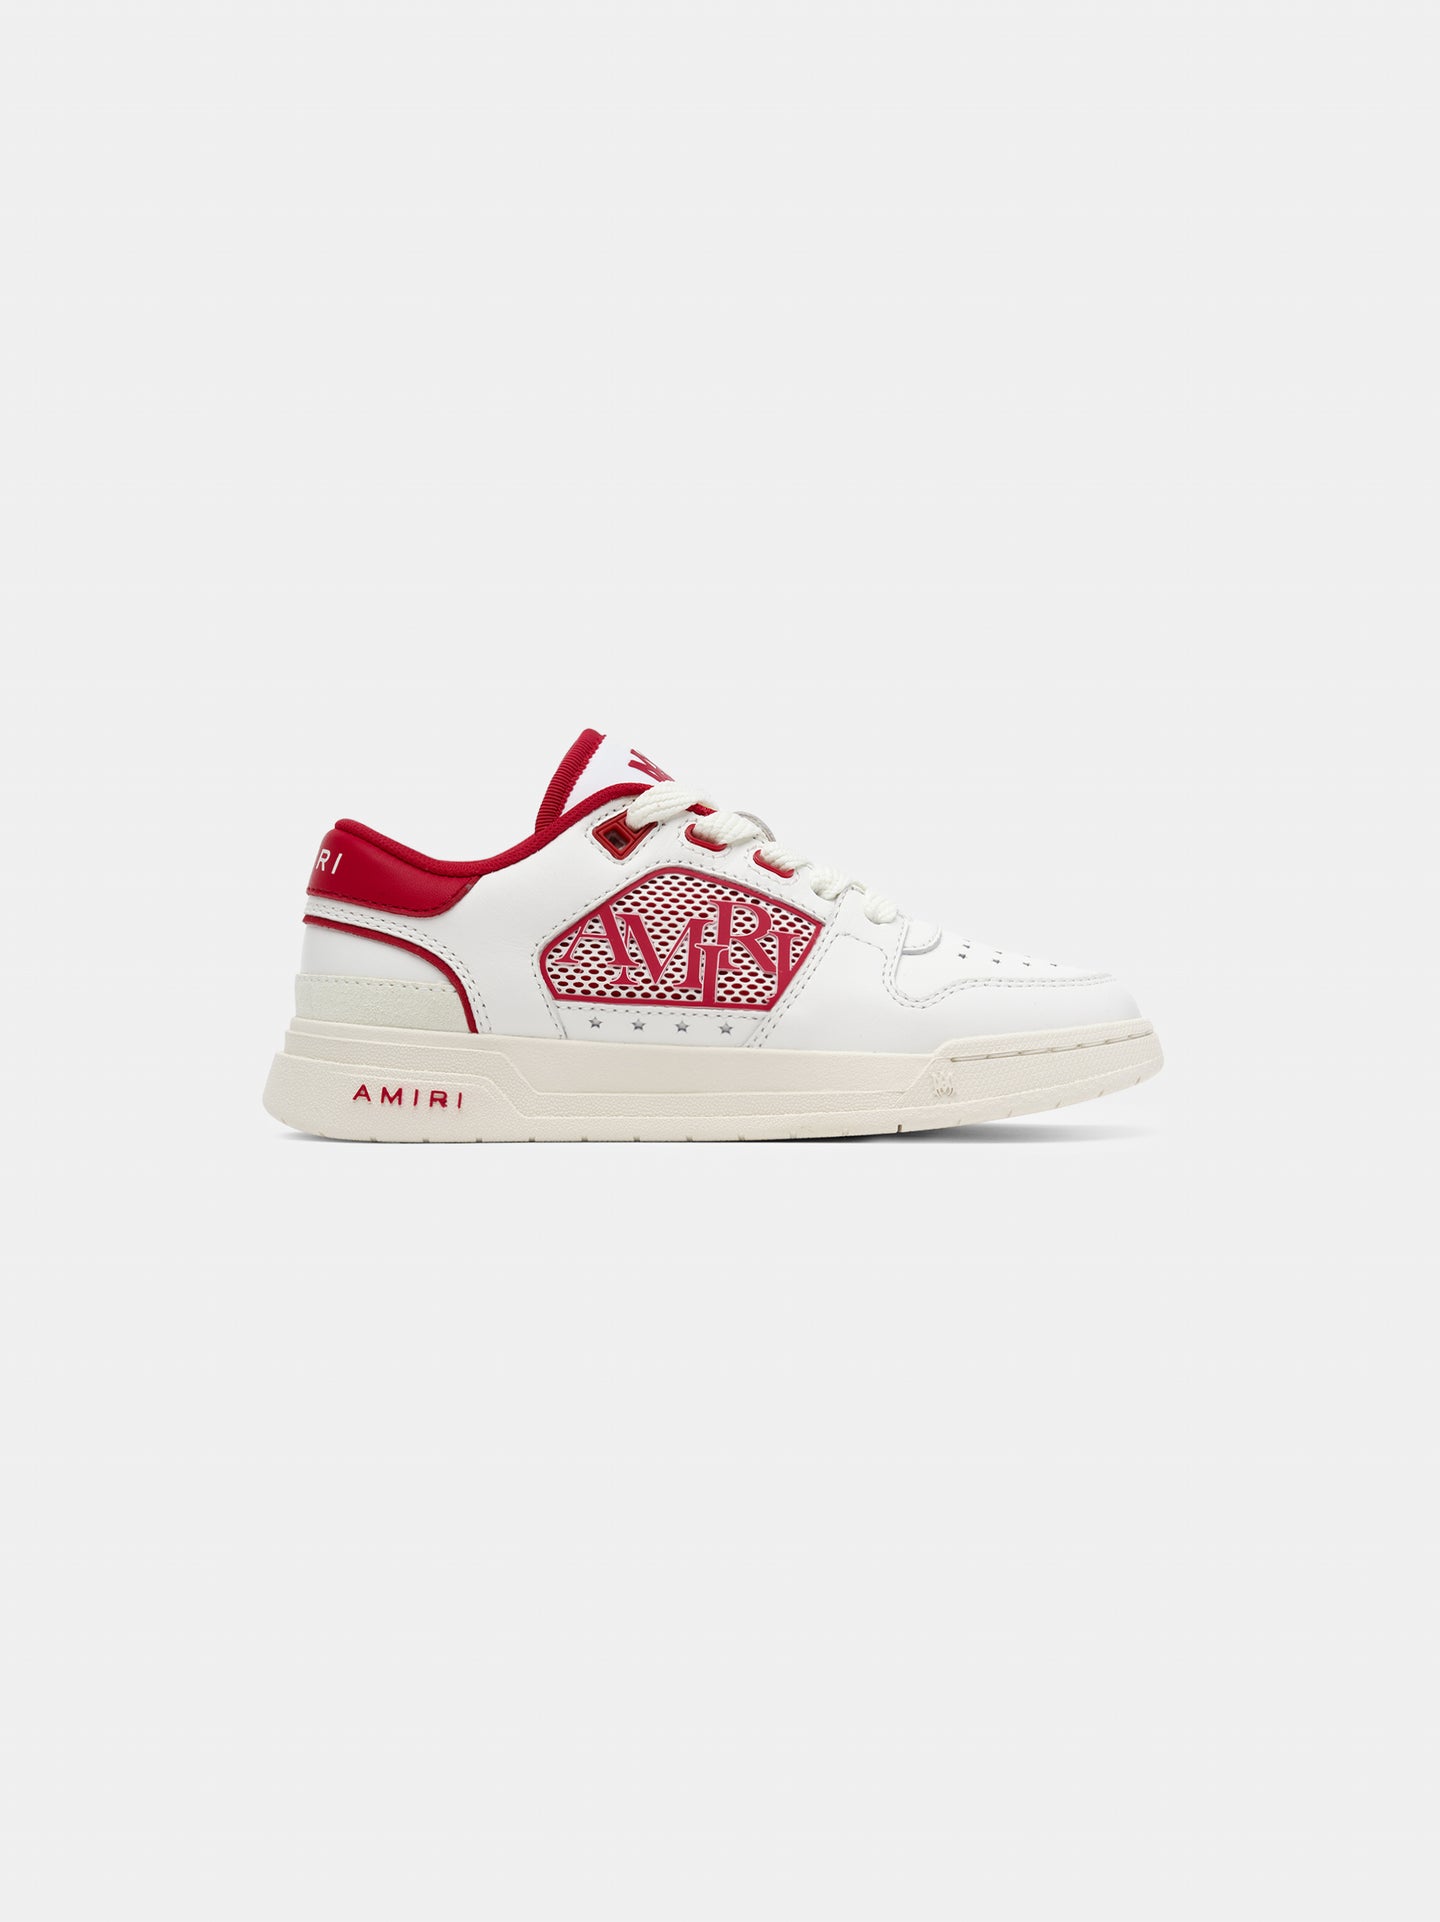 KIDS - KIDS' CLASSIC LOW - White Red